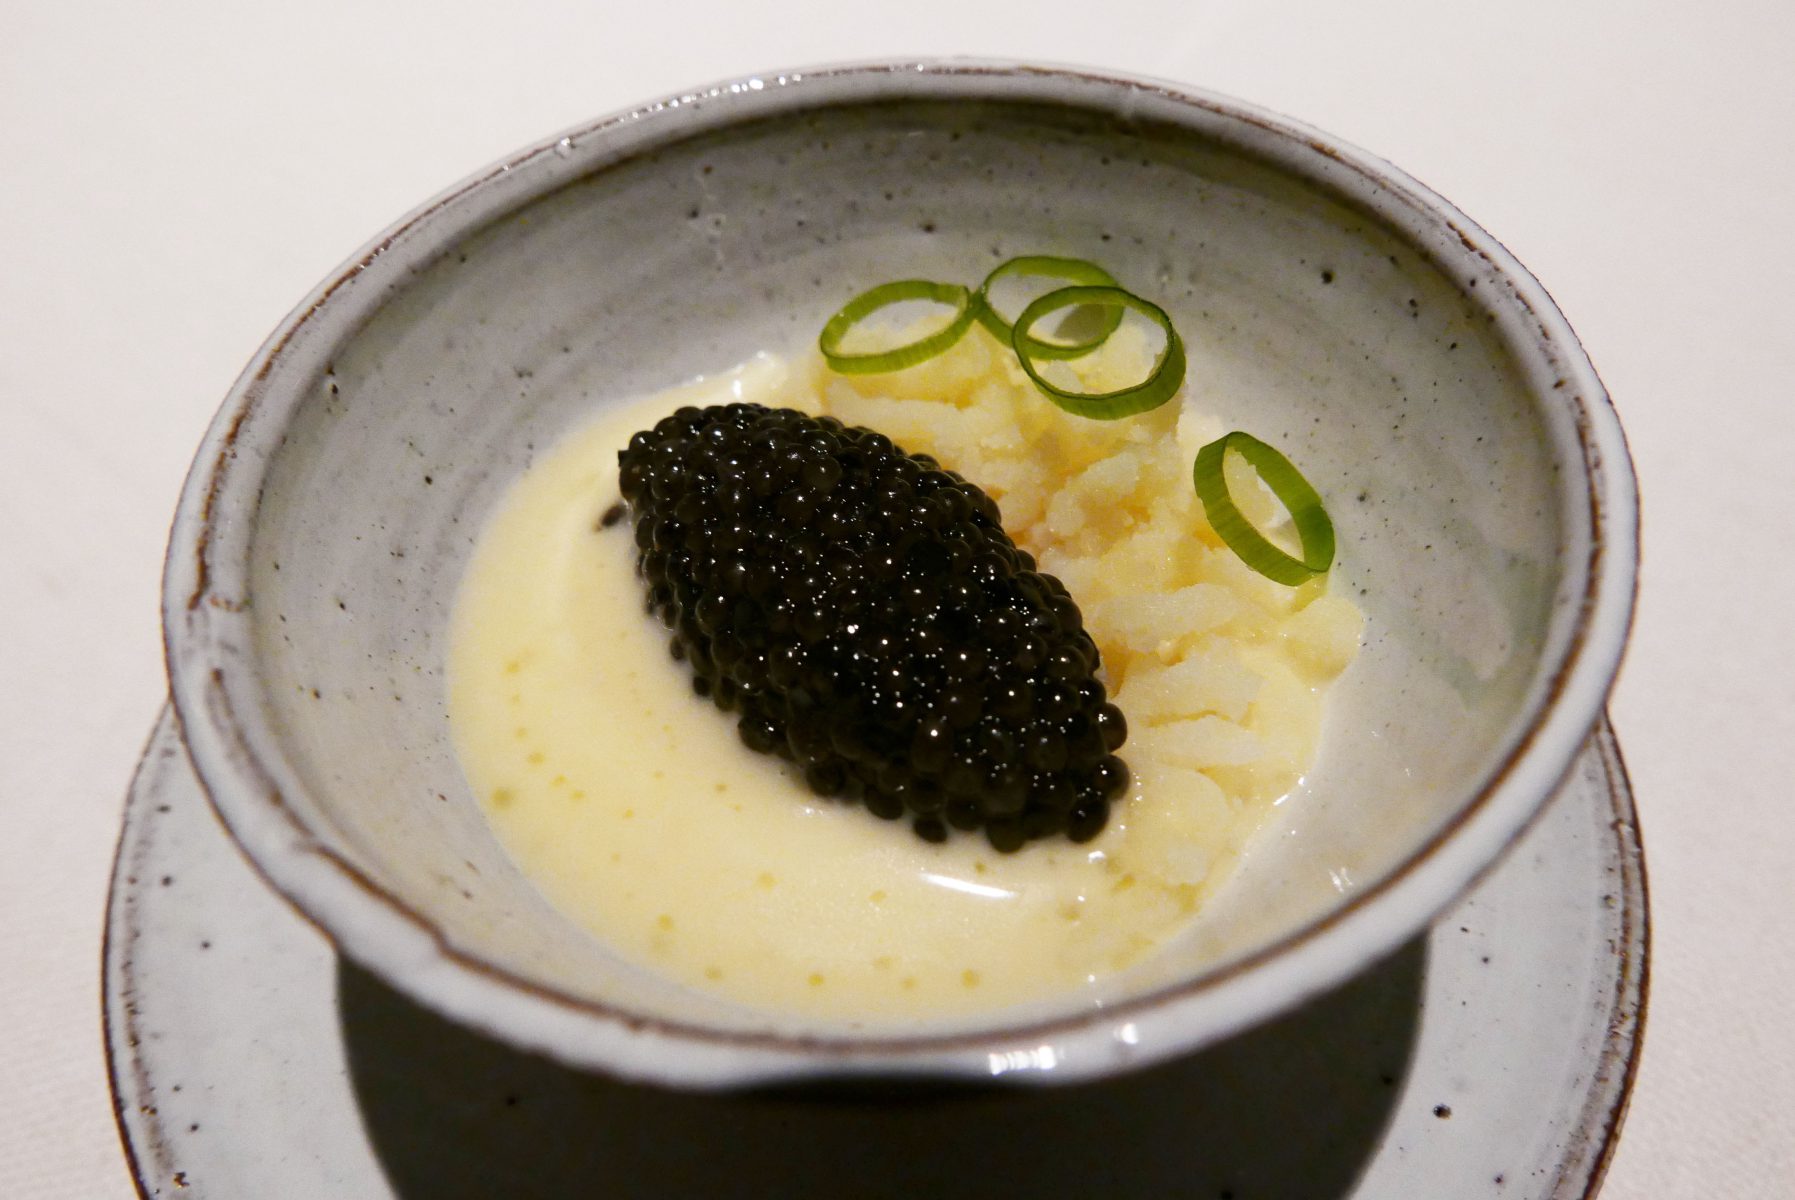 Pressed and creamed potato with oscietra caviar, smoked bacon butter and vichyssoise at Frantzen in Stockholm in August